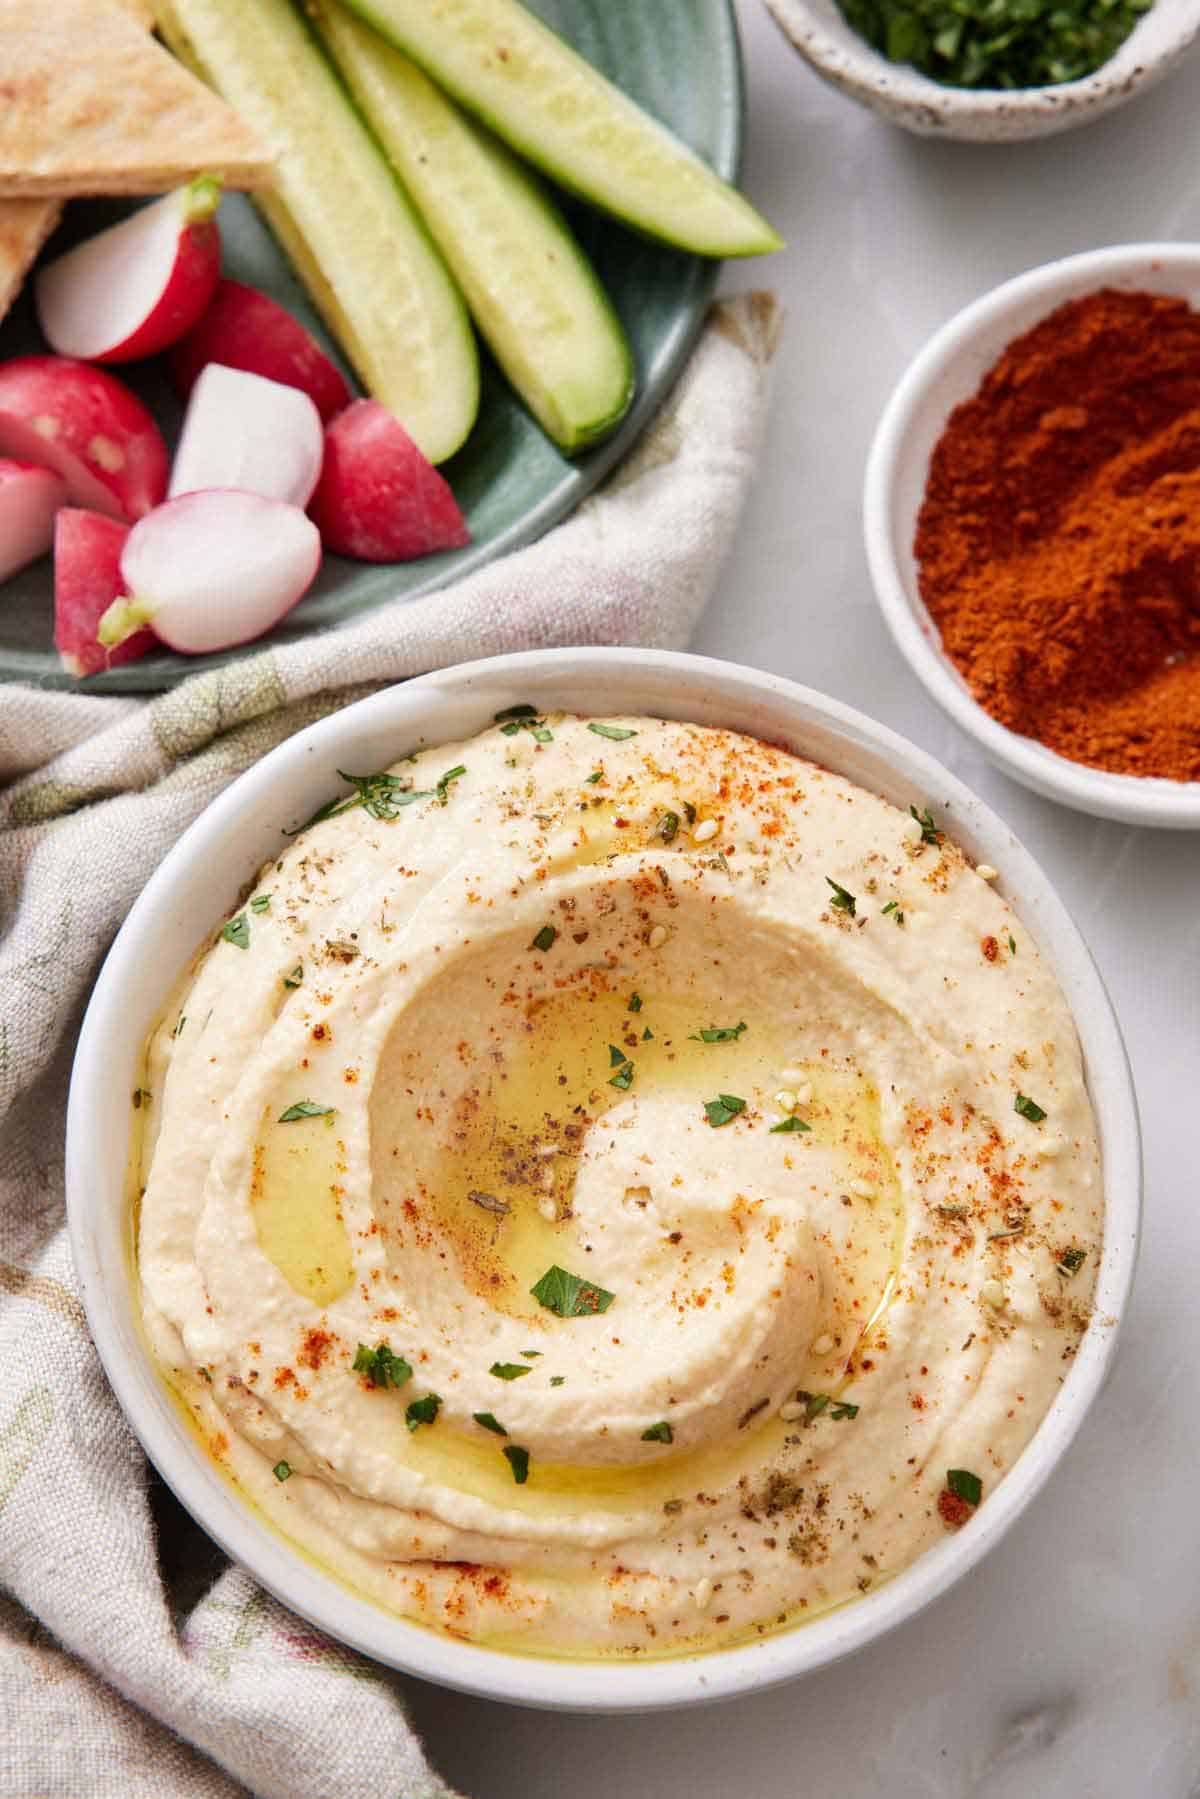 Overhead view of a bowl of hummus with oil, parsley, and paprika as garnish. A bowl of cucumbers and radish in the back with a bowl of paprika on the side.